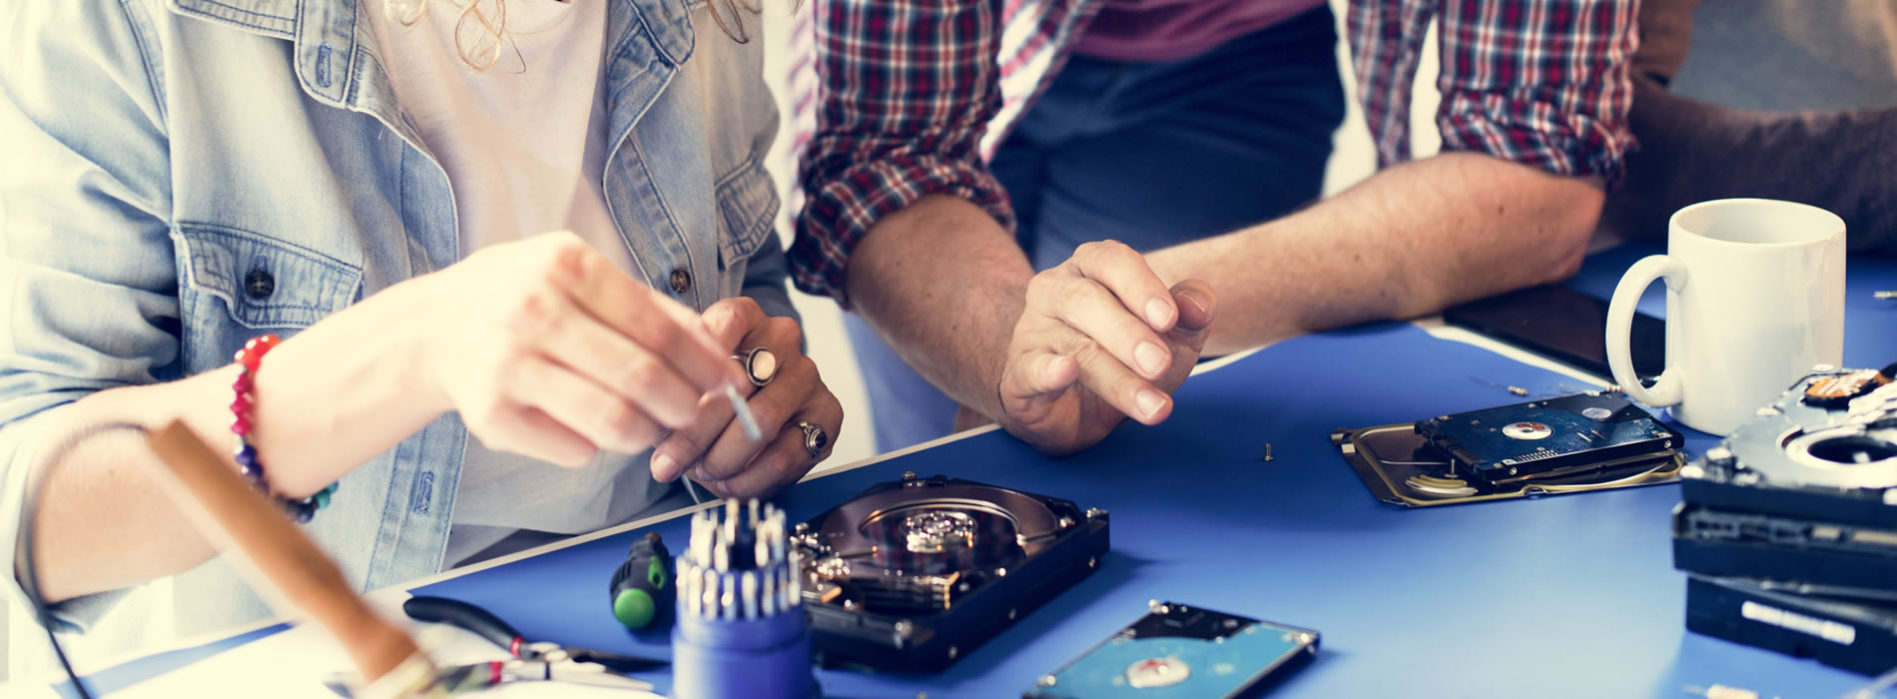 Experienced and knowledgeable laptop repair services